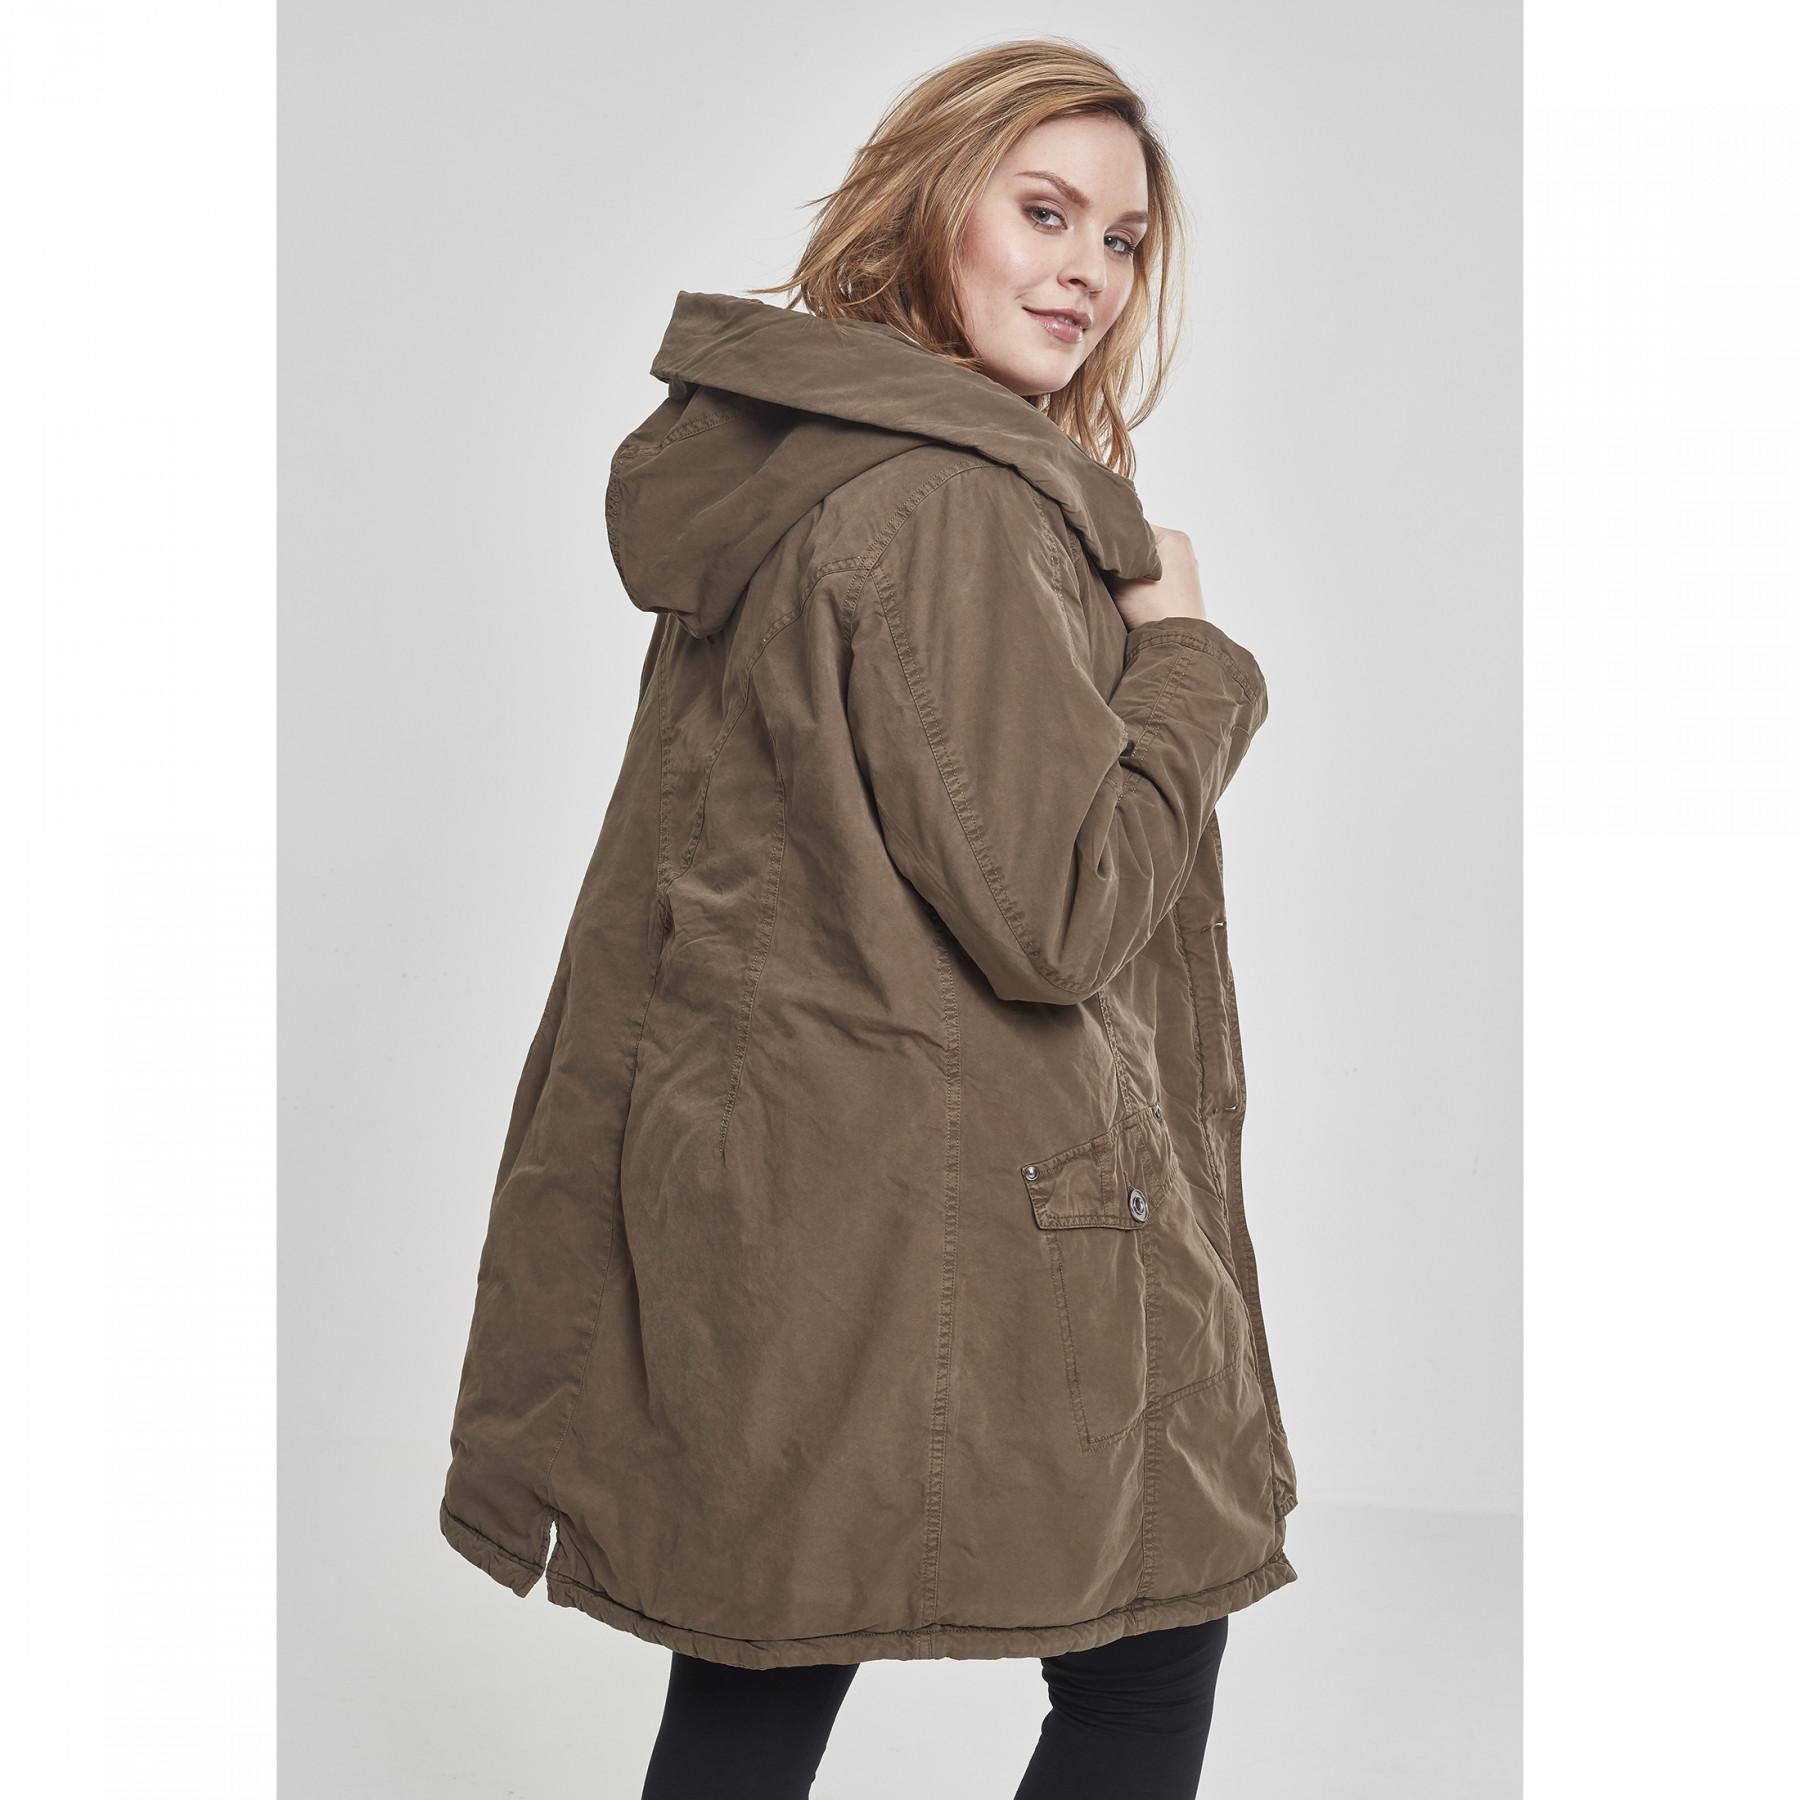 Parka lungo GT donna Urban Classic gart wahed